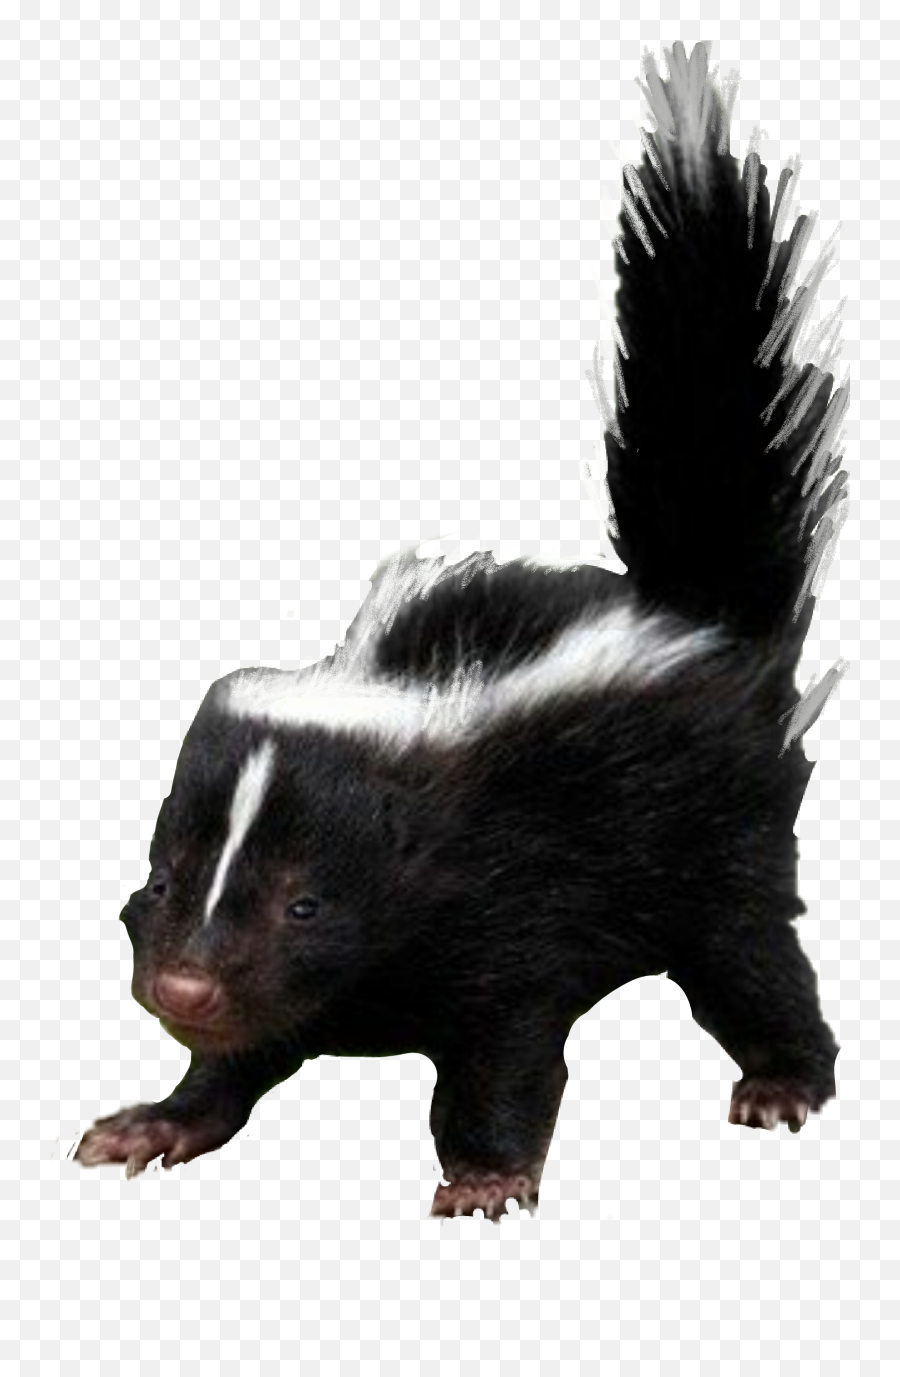 Largest Collection Of Free - Toedit Sigung Stickers Striped Skunk Png,Skunkette Furry Icon